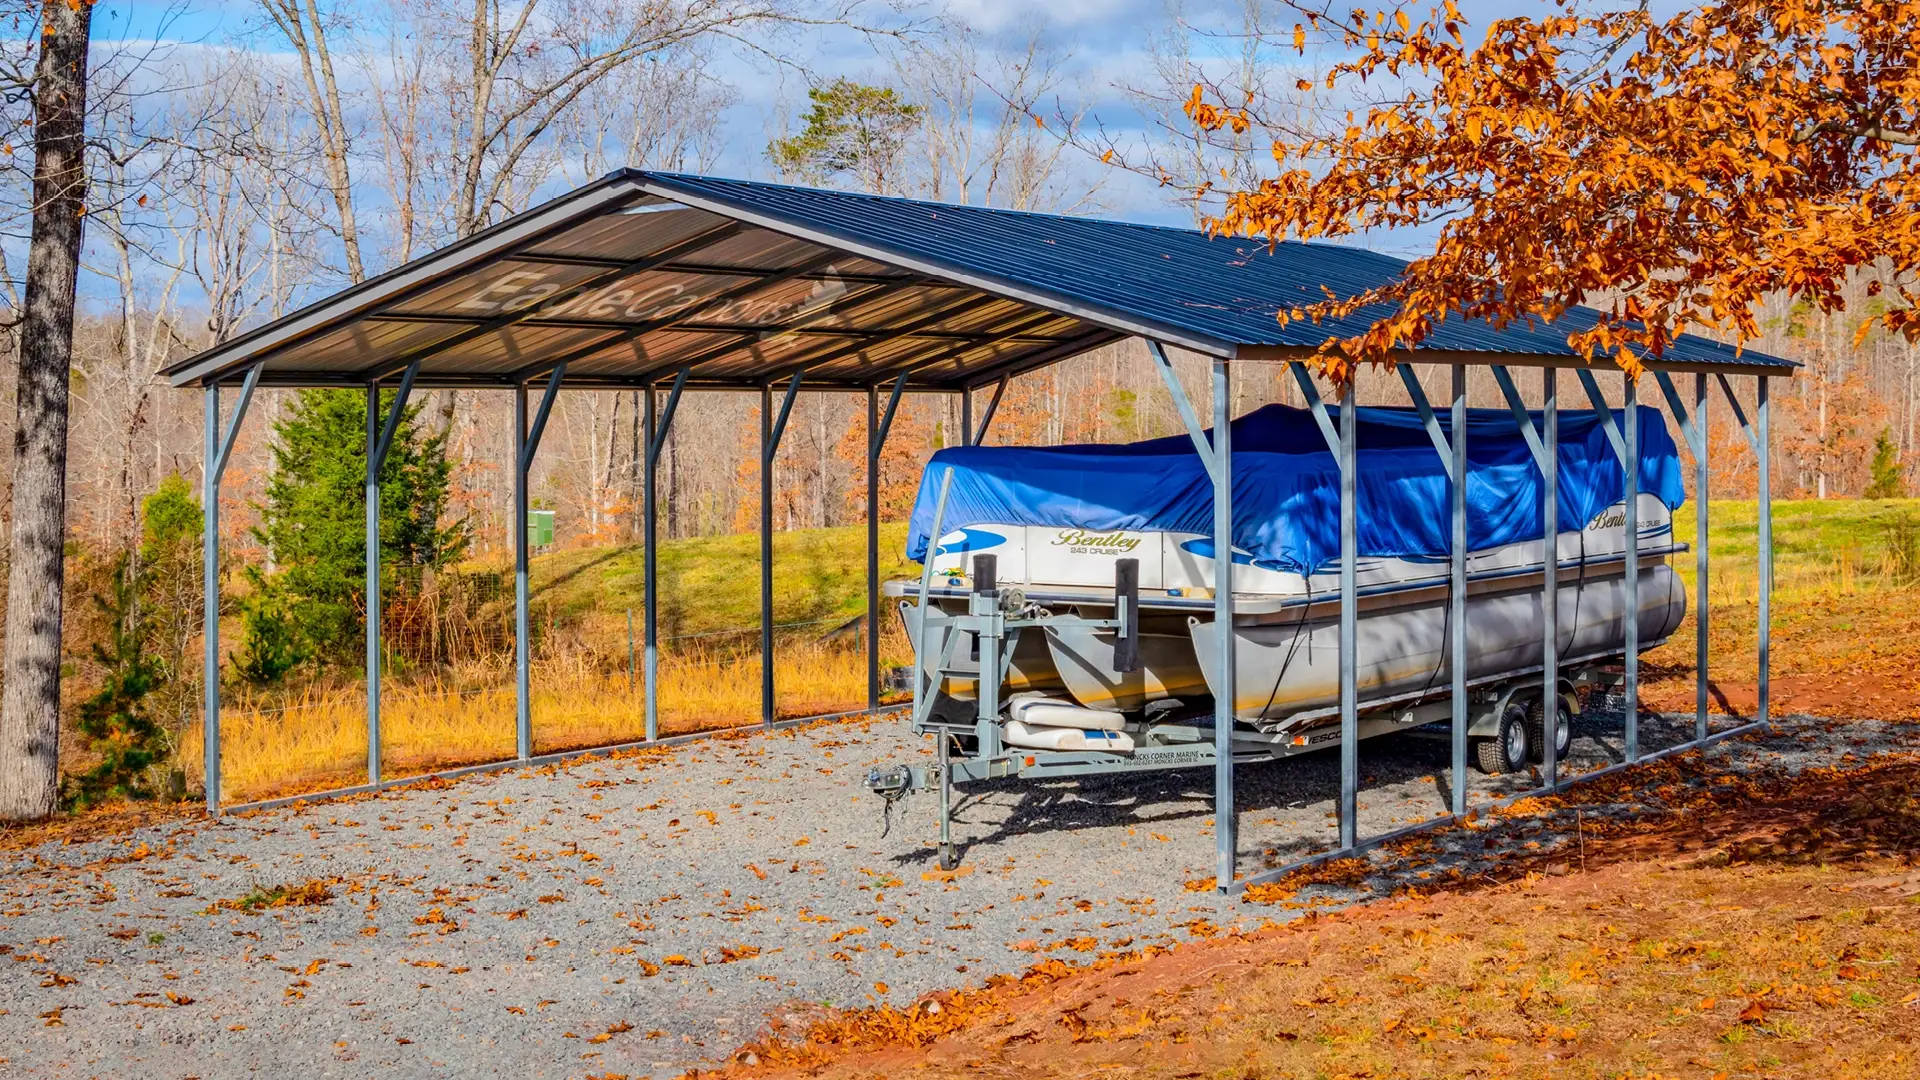 A carport with a boat underneath it.